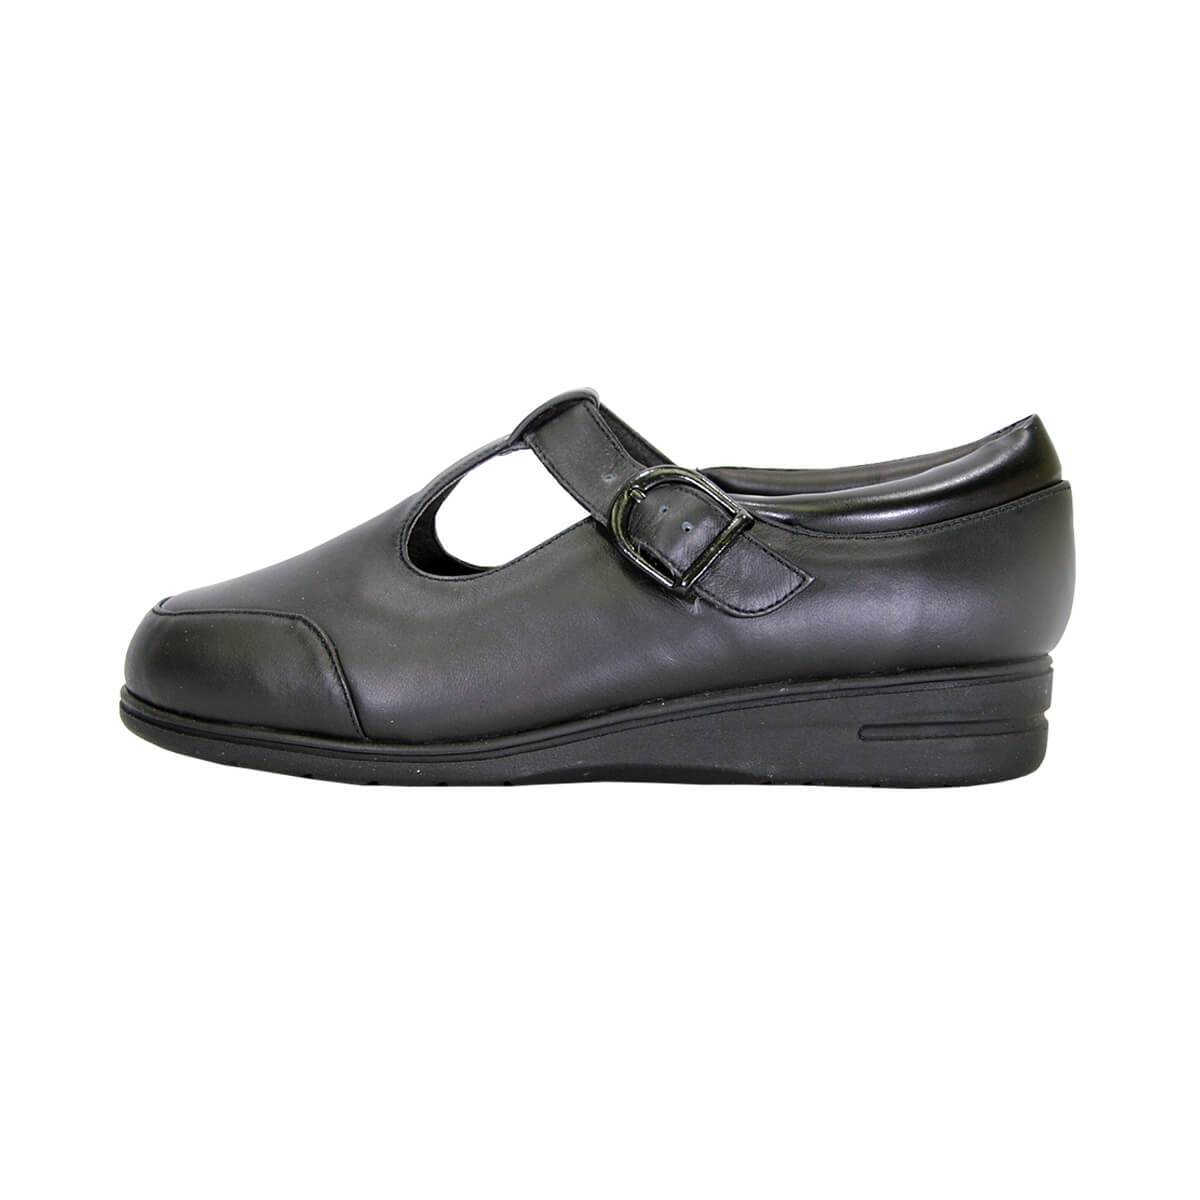 24 HOUR COMFORT Aileen Women's Wide Width Leather Loafers